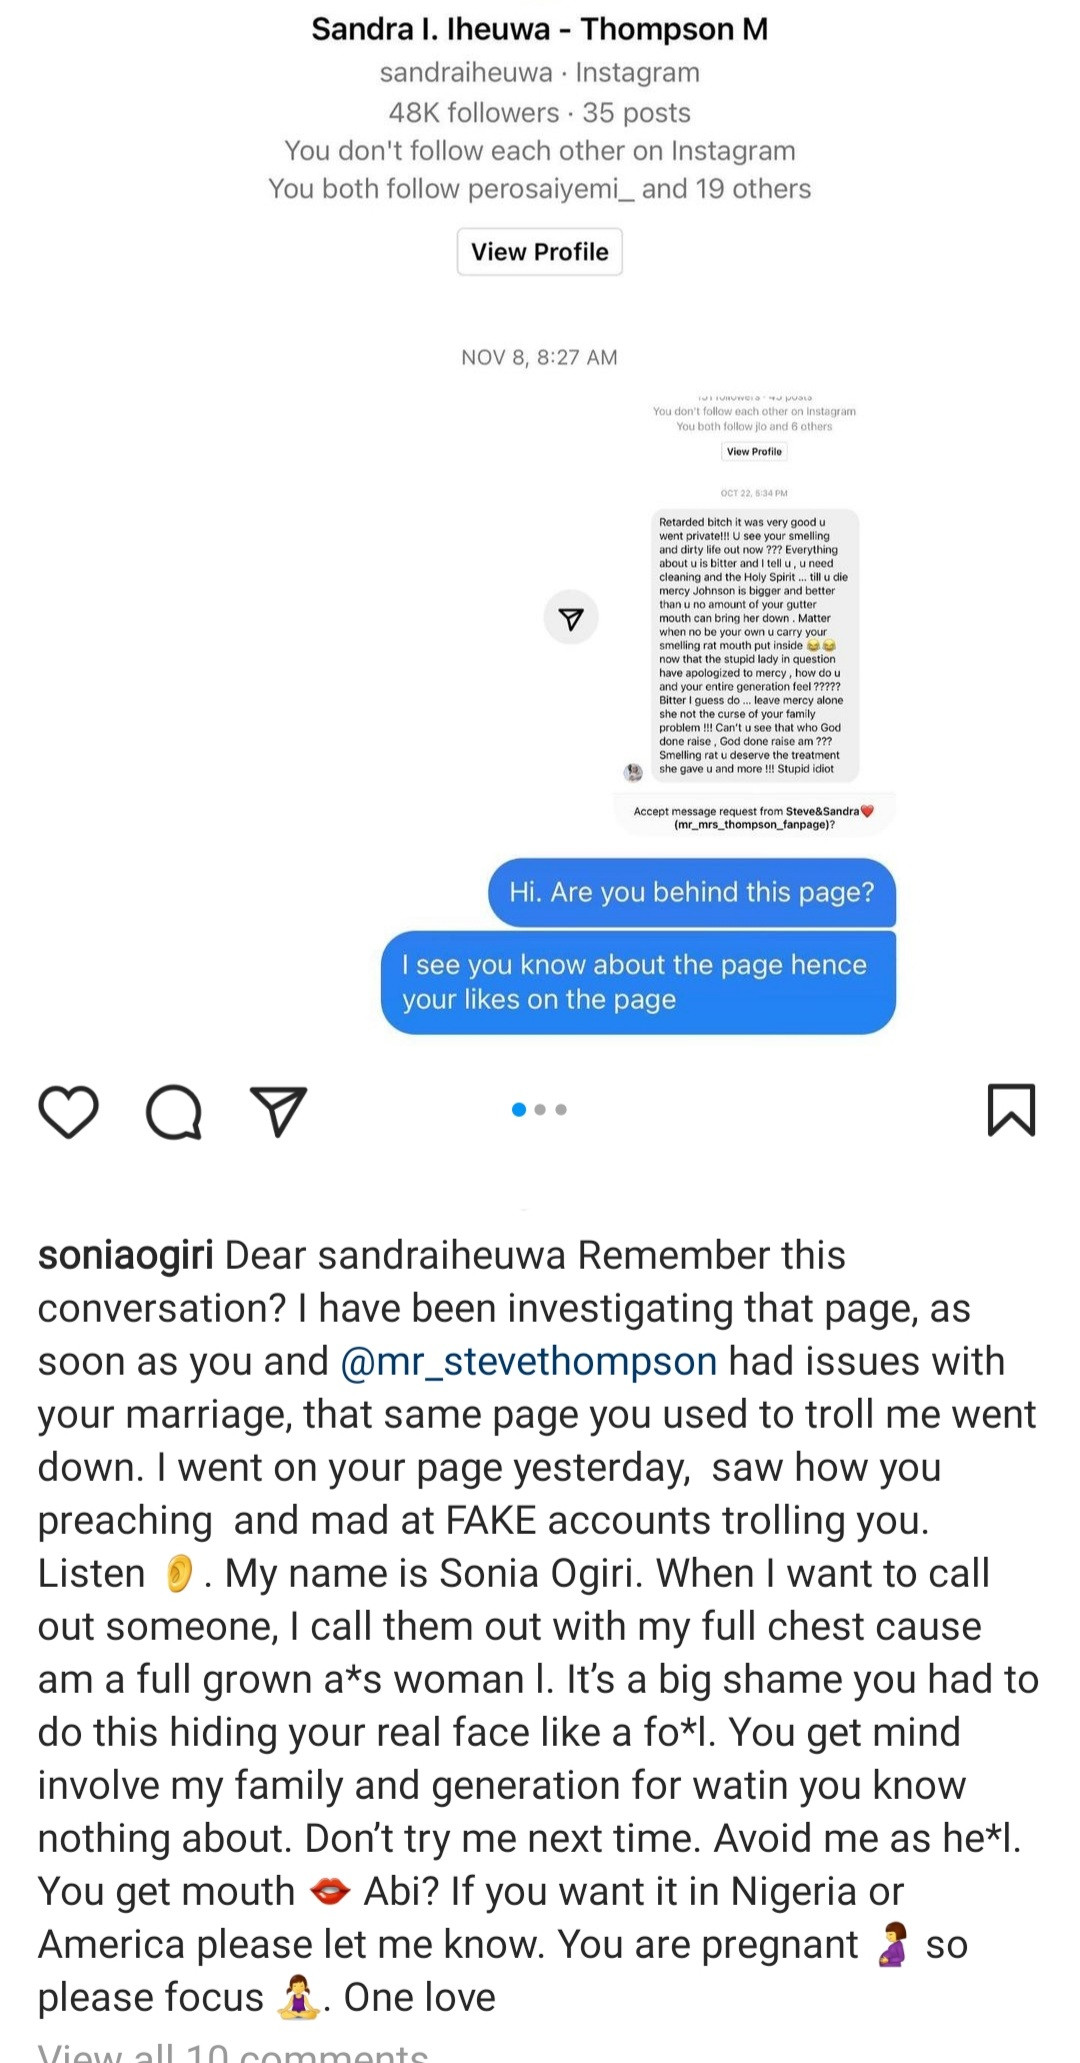 Actress, Sonia Ogiri confronts Sandra Iheuwa as she claims her investigations showed she